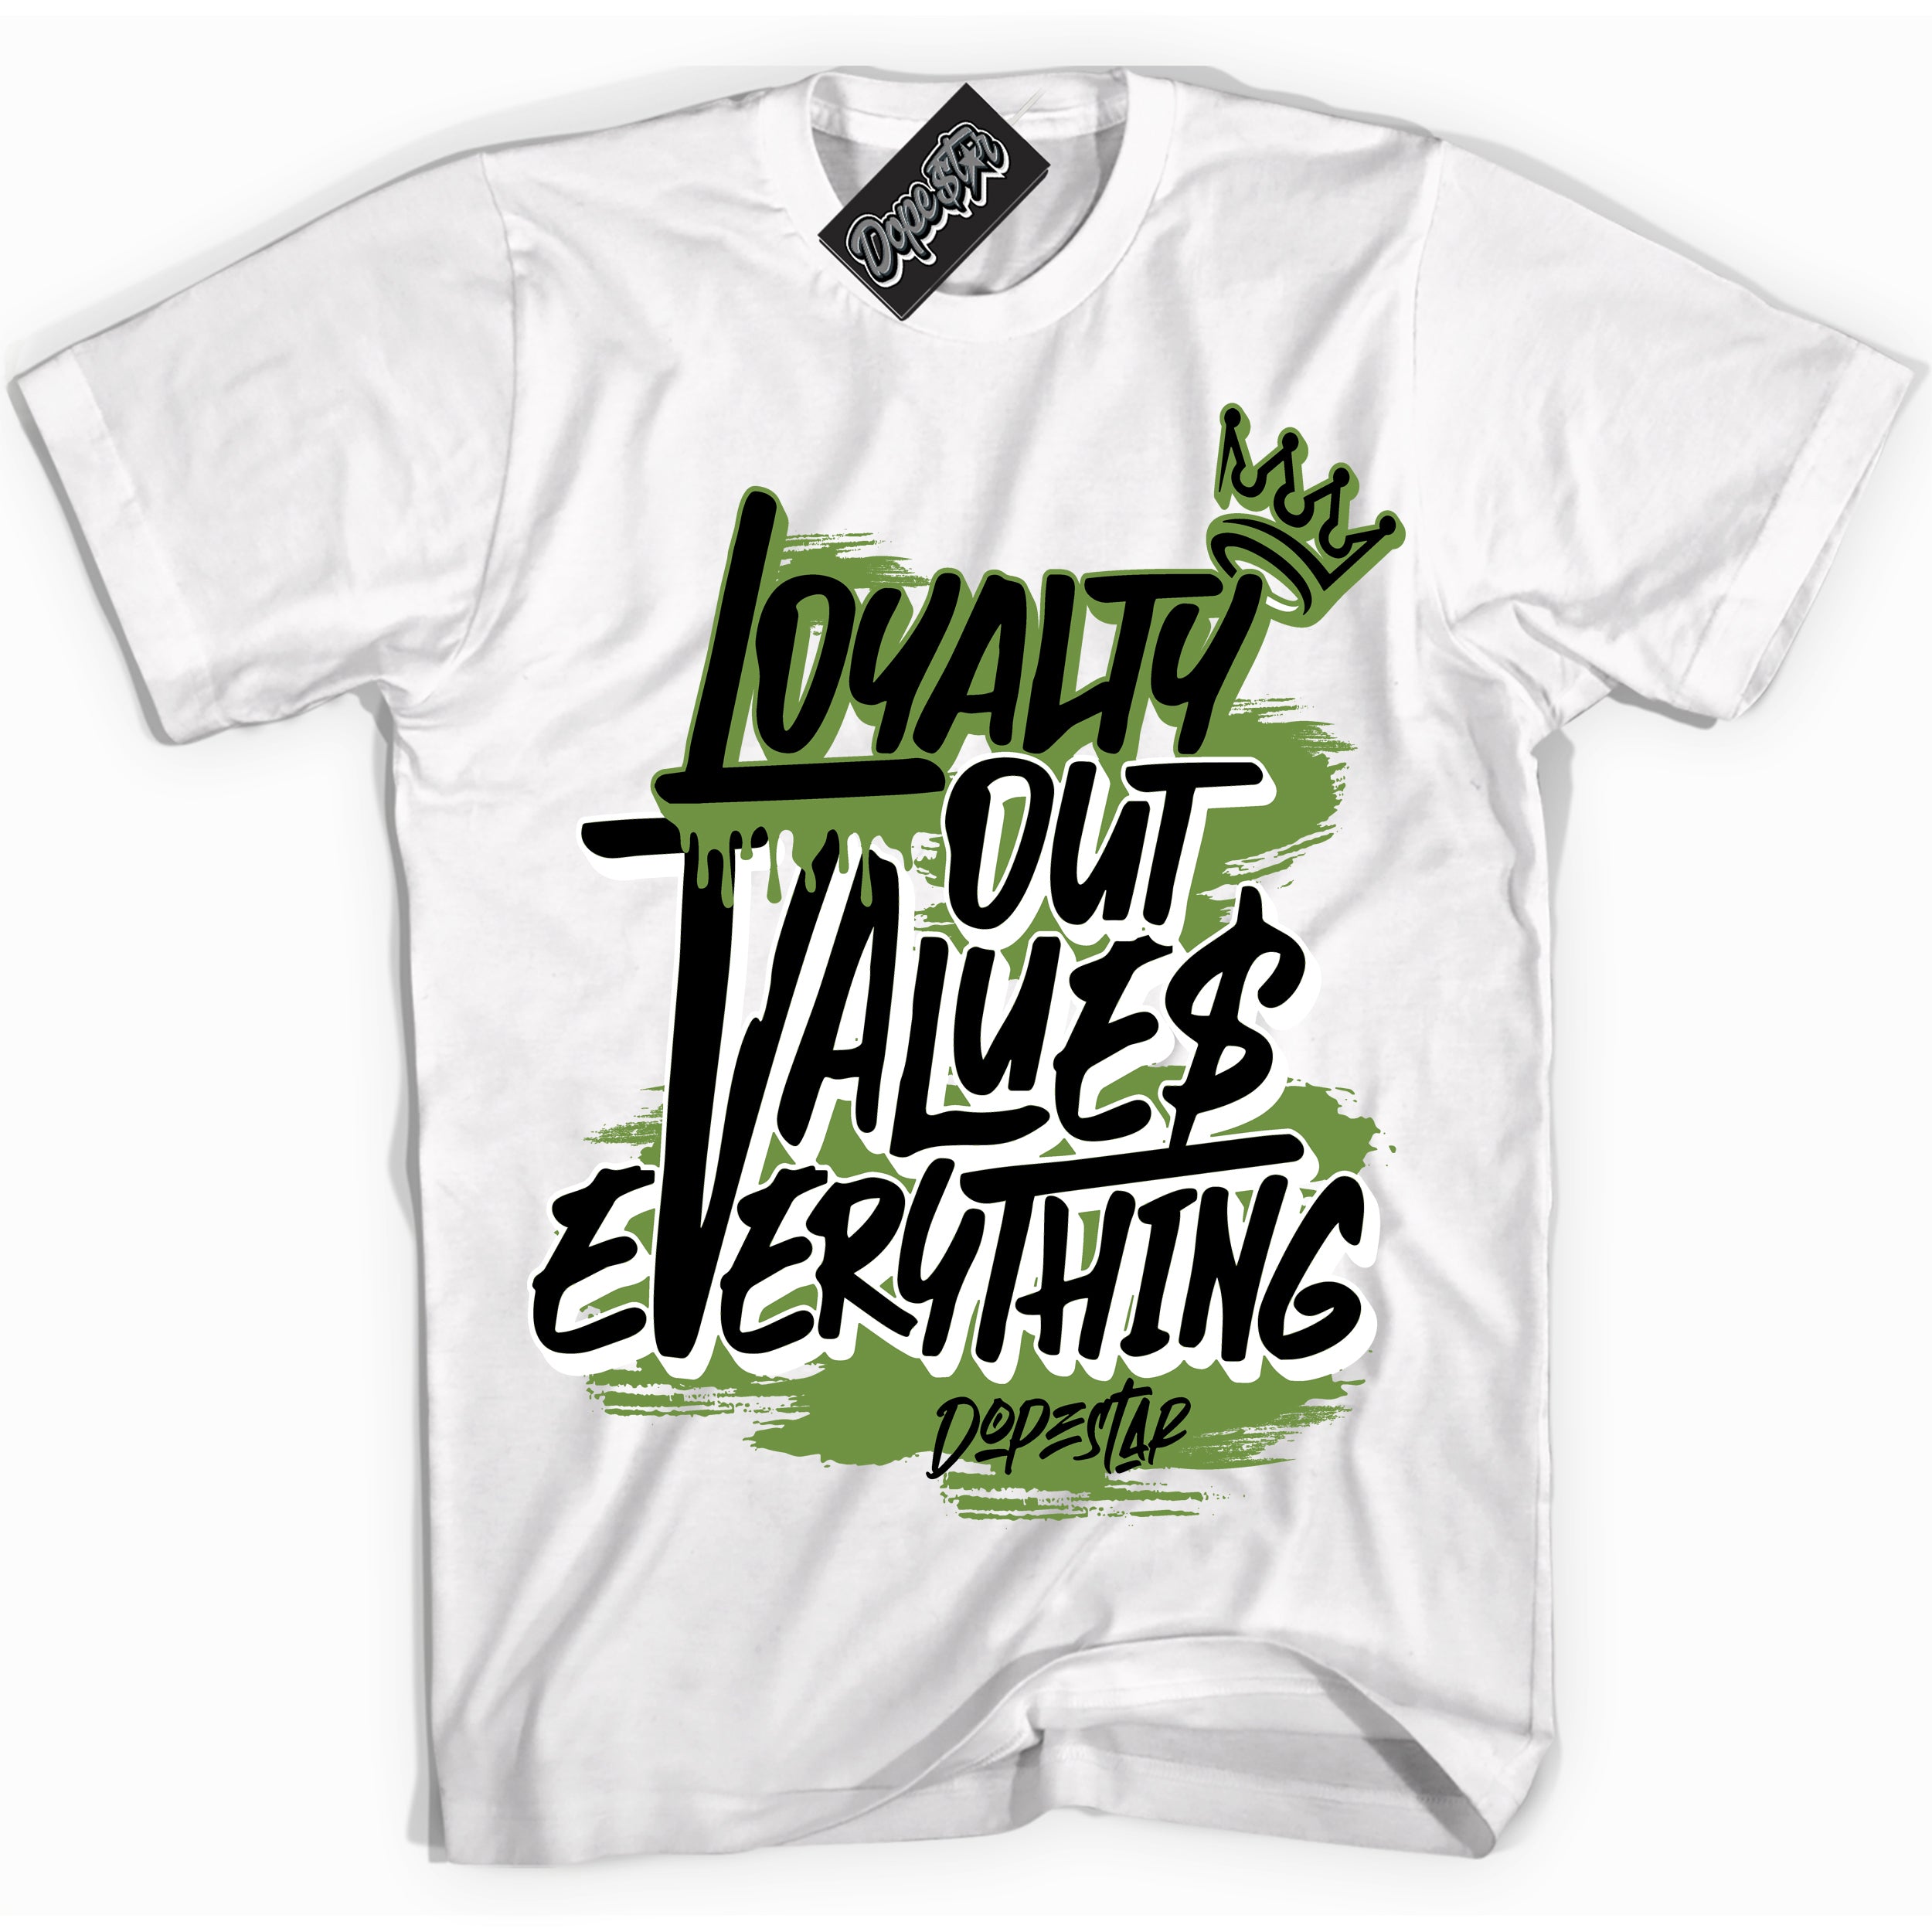 Cool White Shirt with “ Loyalty Out Values Everything” design that perfectly matches Altitude Green 1s Sneakers.